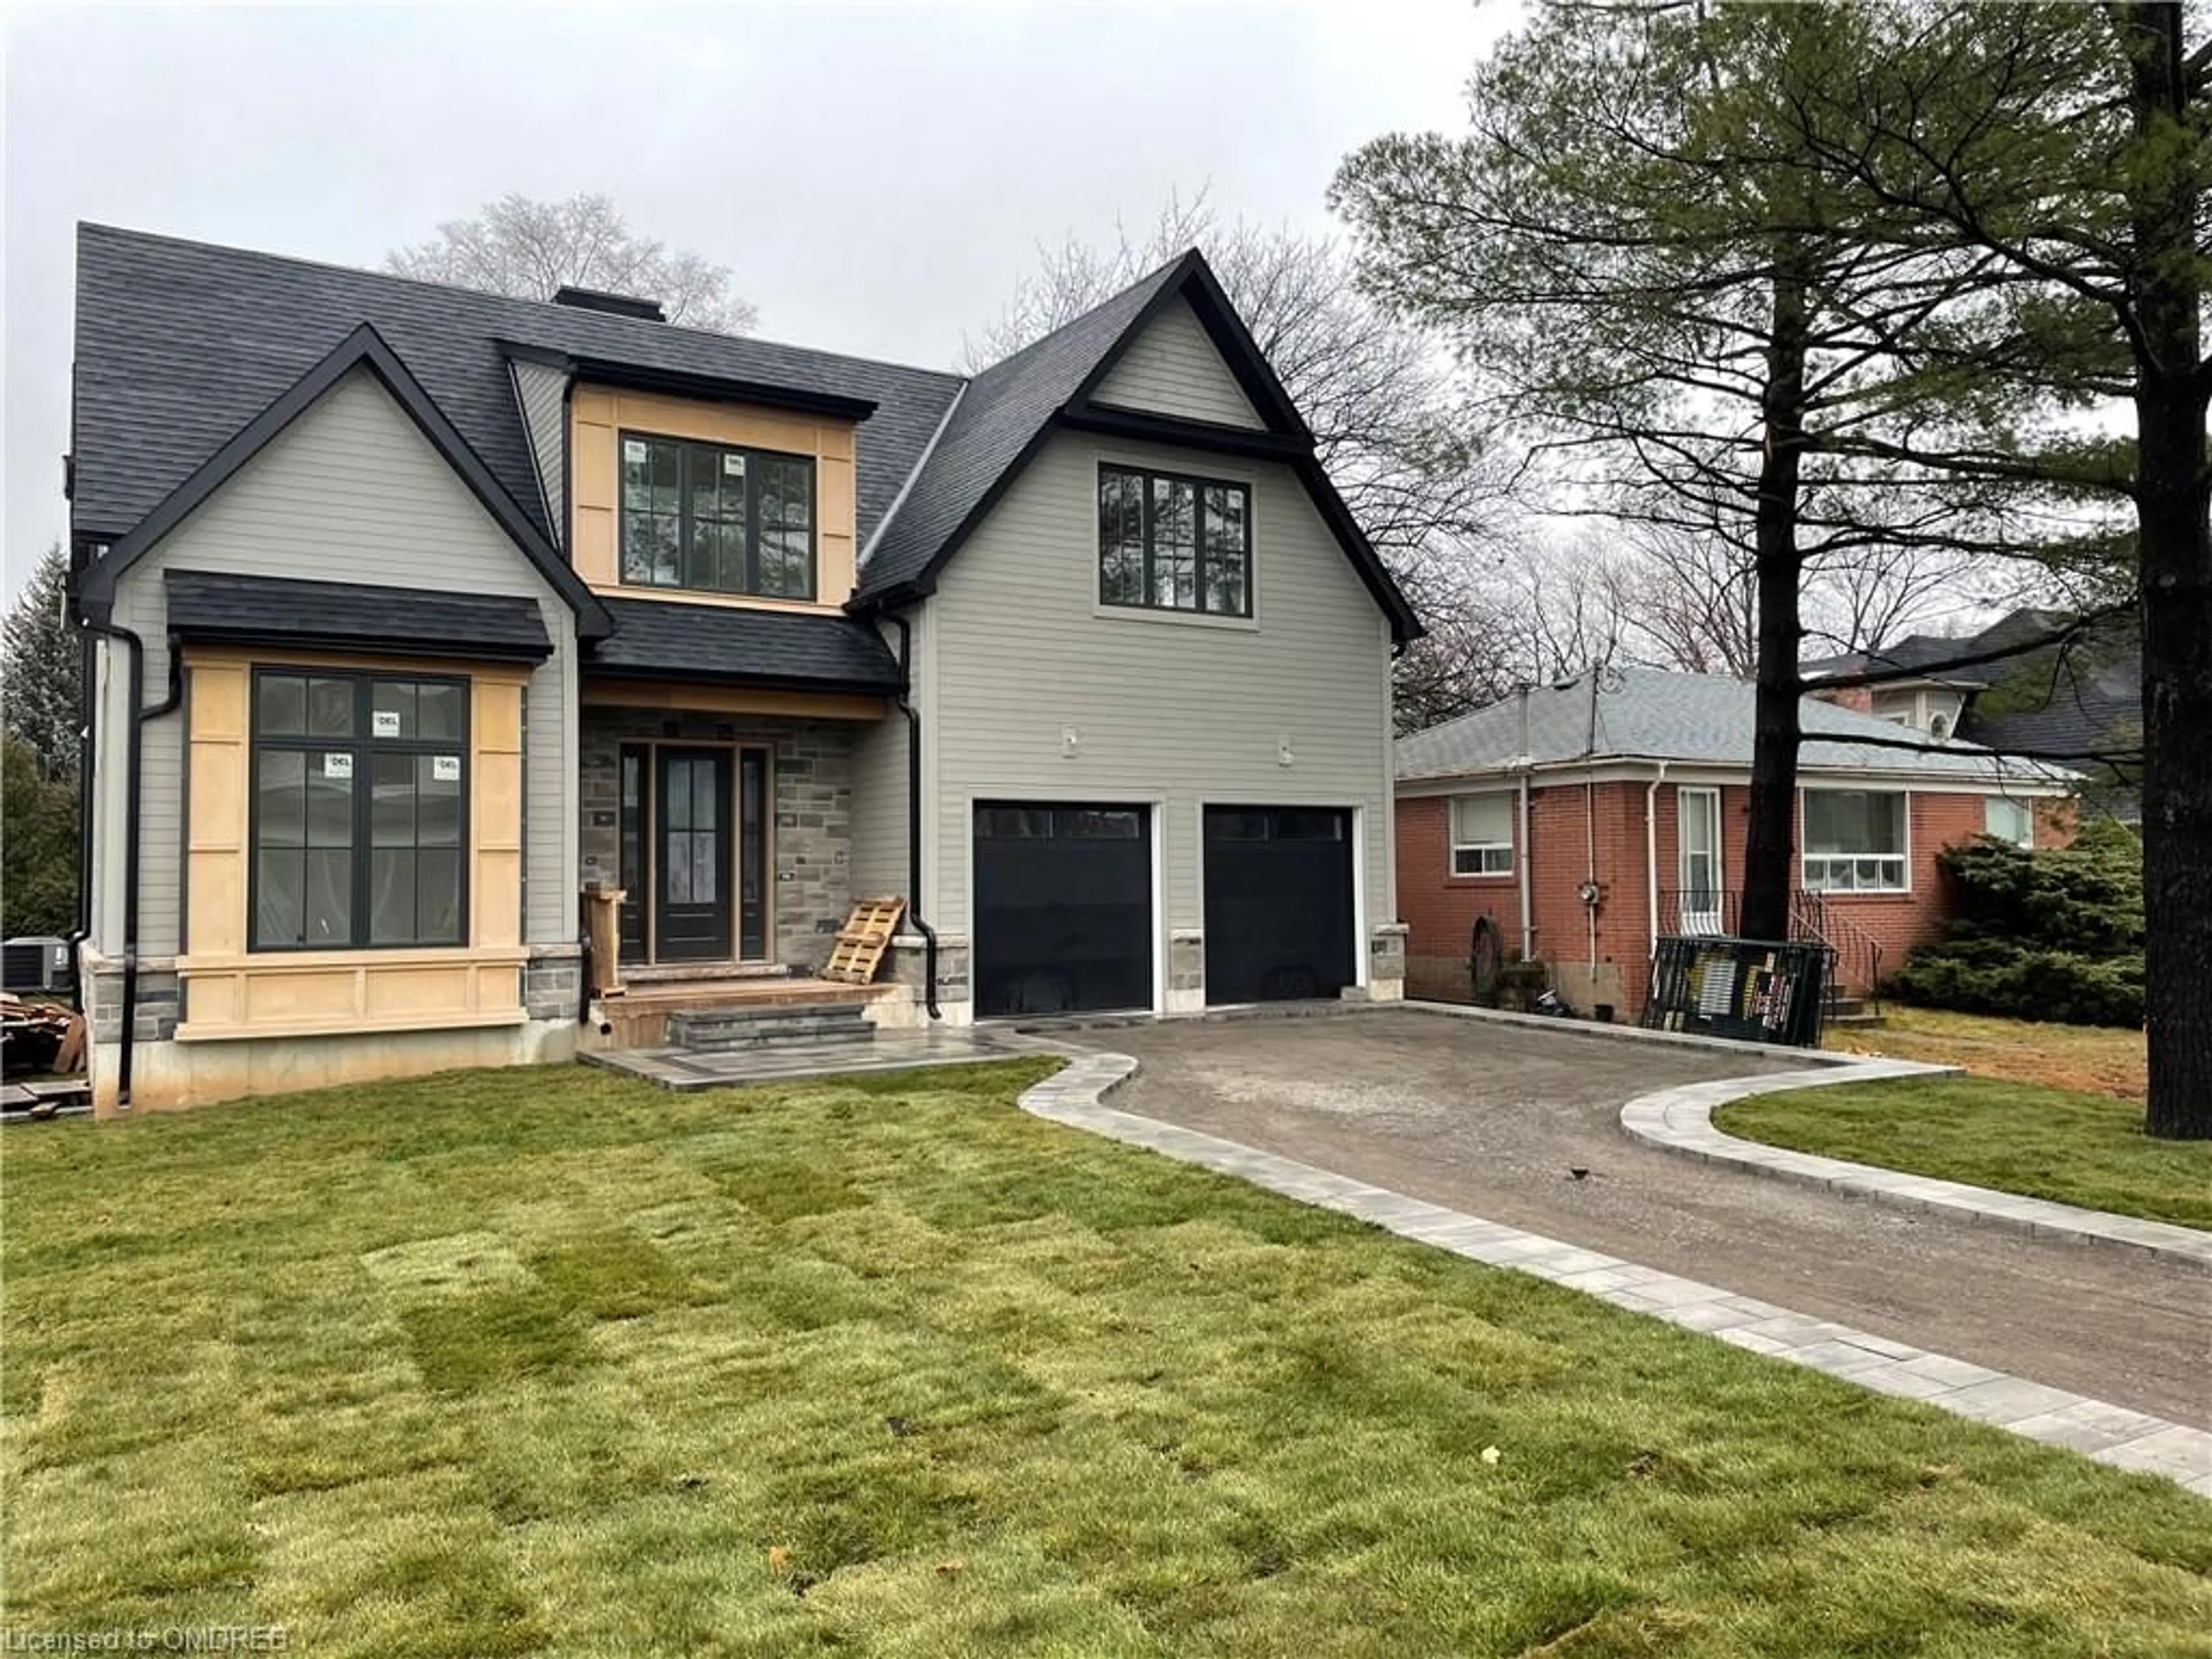 Home with brick exterior material for 601 Maplehurst Ave, Oakville Ontario L6L 4Y8